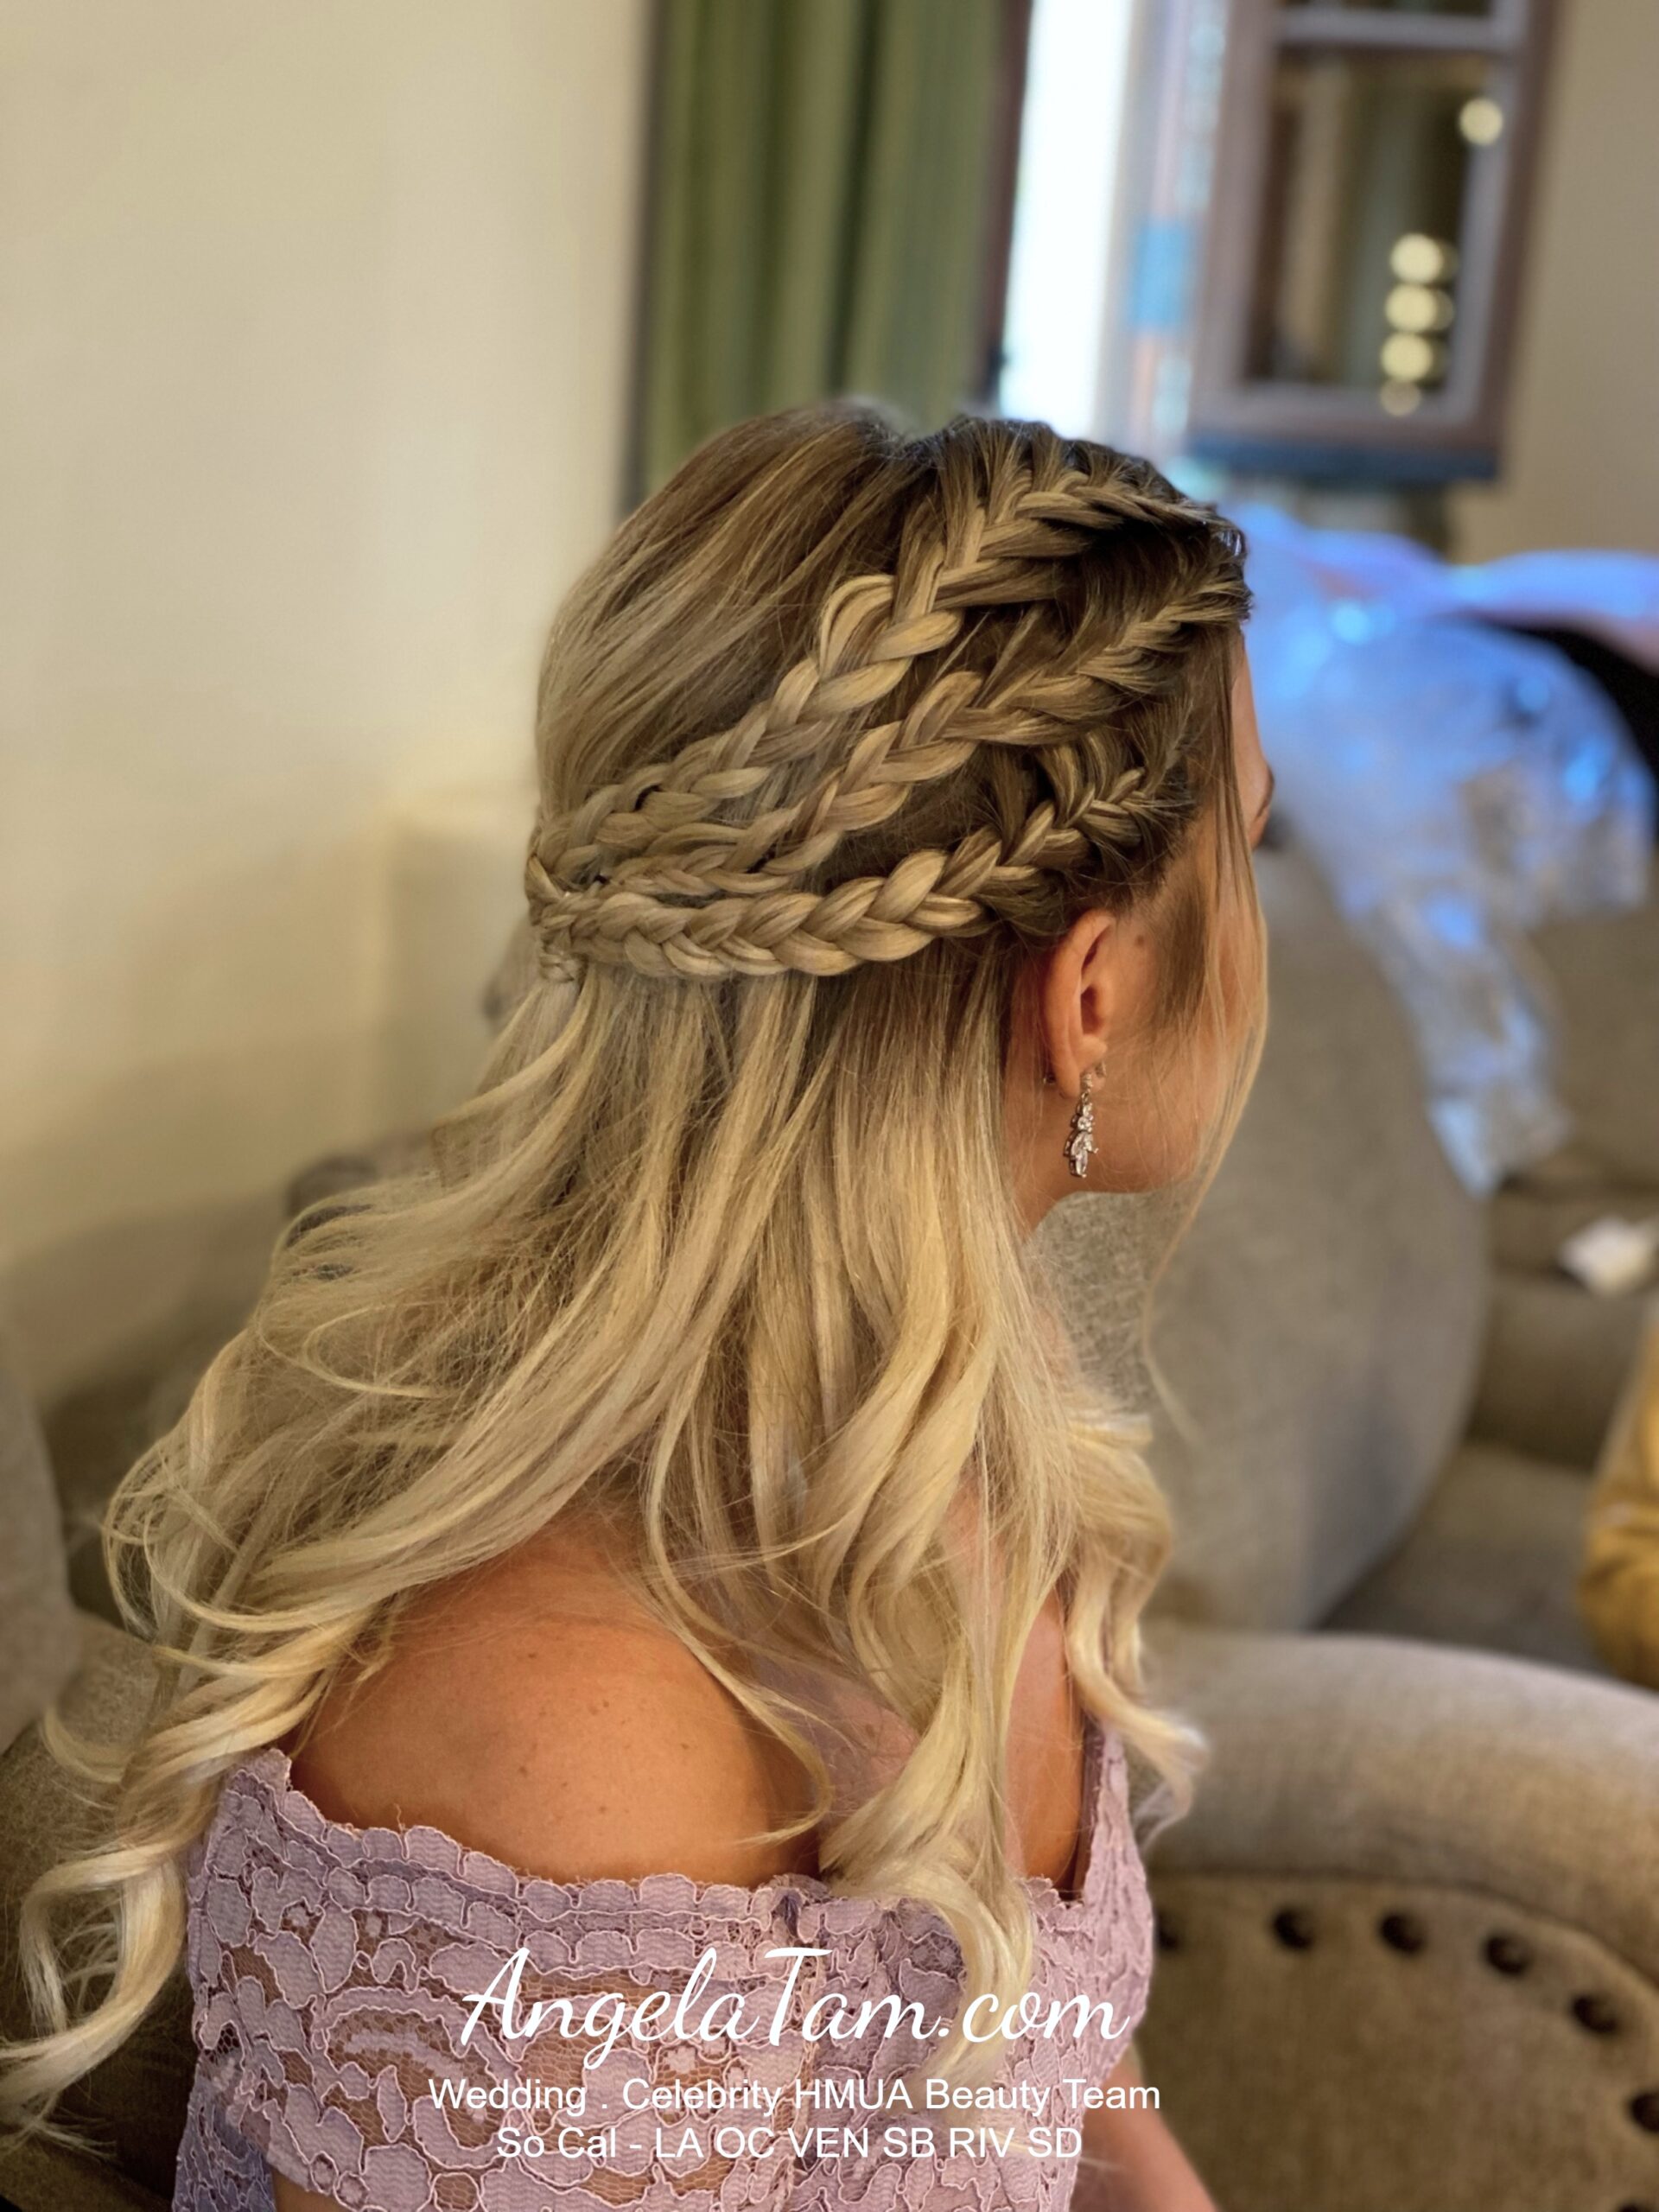 1 Hairstyle, 4 Ways: The Rope Braid | How to Do a Rope Braid